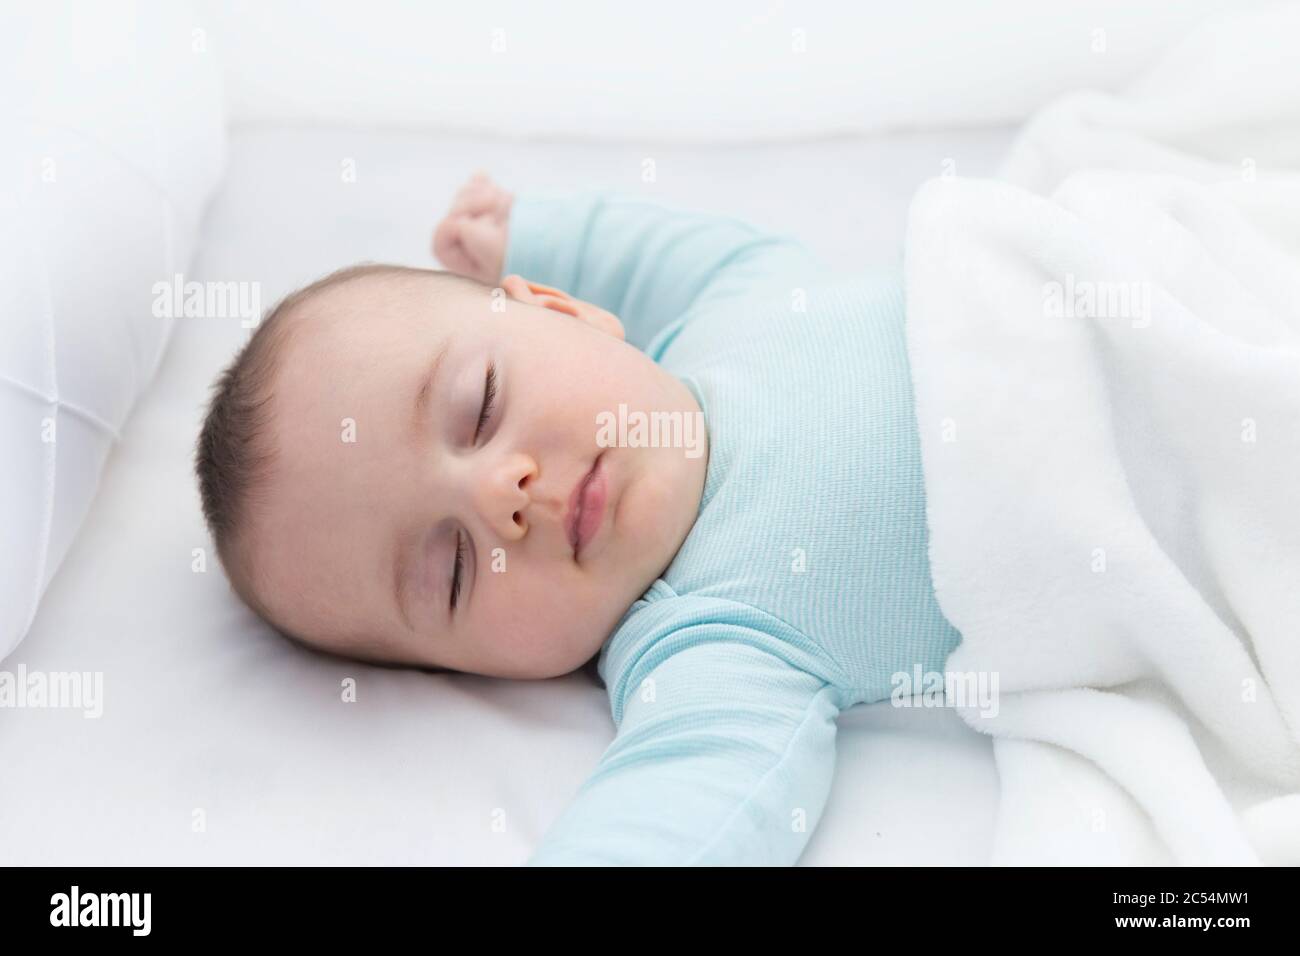 Baby sleeping with a pacifier aside. Light blue pajama and white bed sheets. Stock Photo